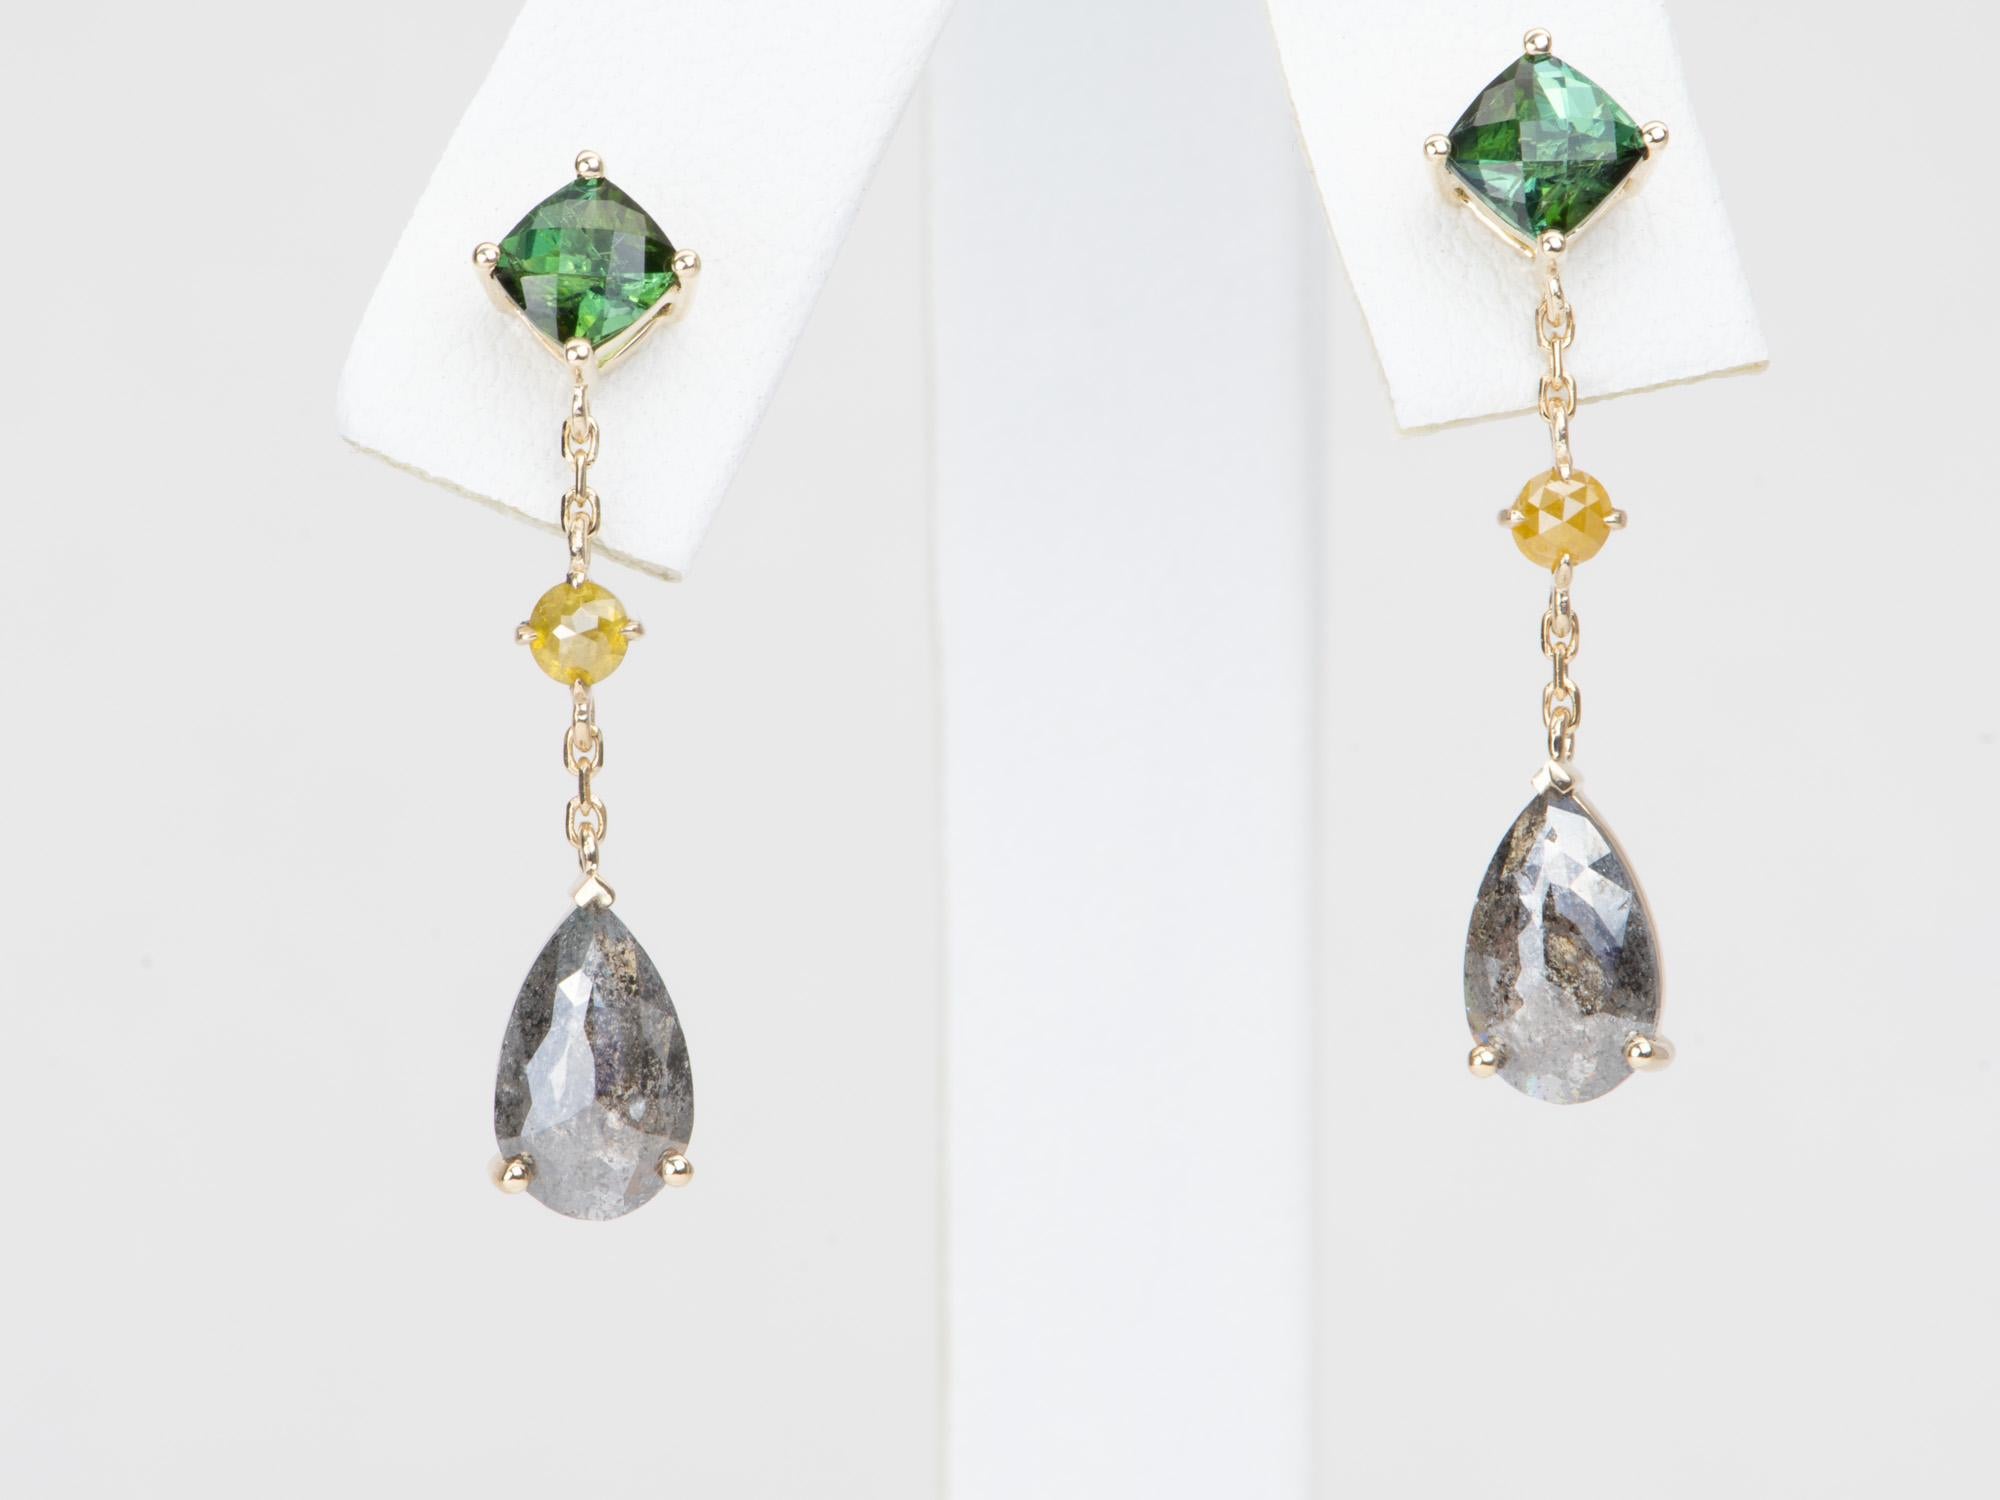 Glamorize your look with these exquisite diamond and tourmaline dangle earrings. Crafted in 14K gold, the pair adds a touch of luxury with its rose cut diamonds and chrome tourmalines. Show off your unique style and make a statement with these